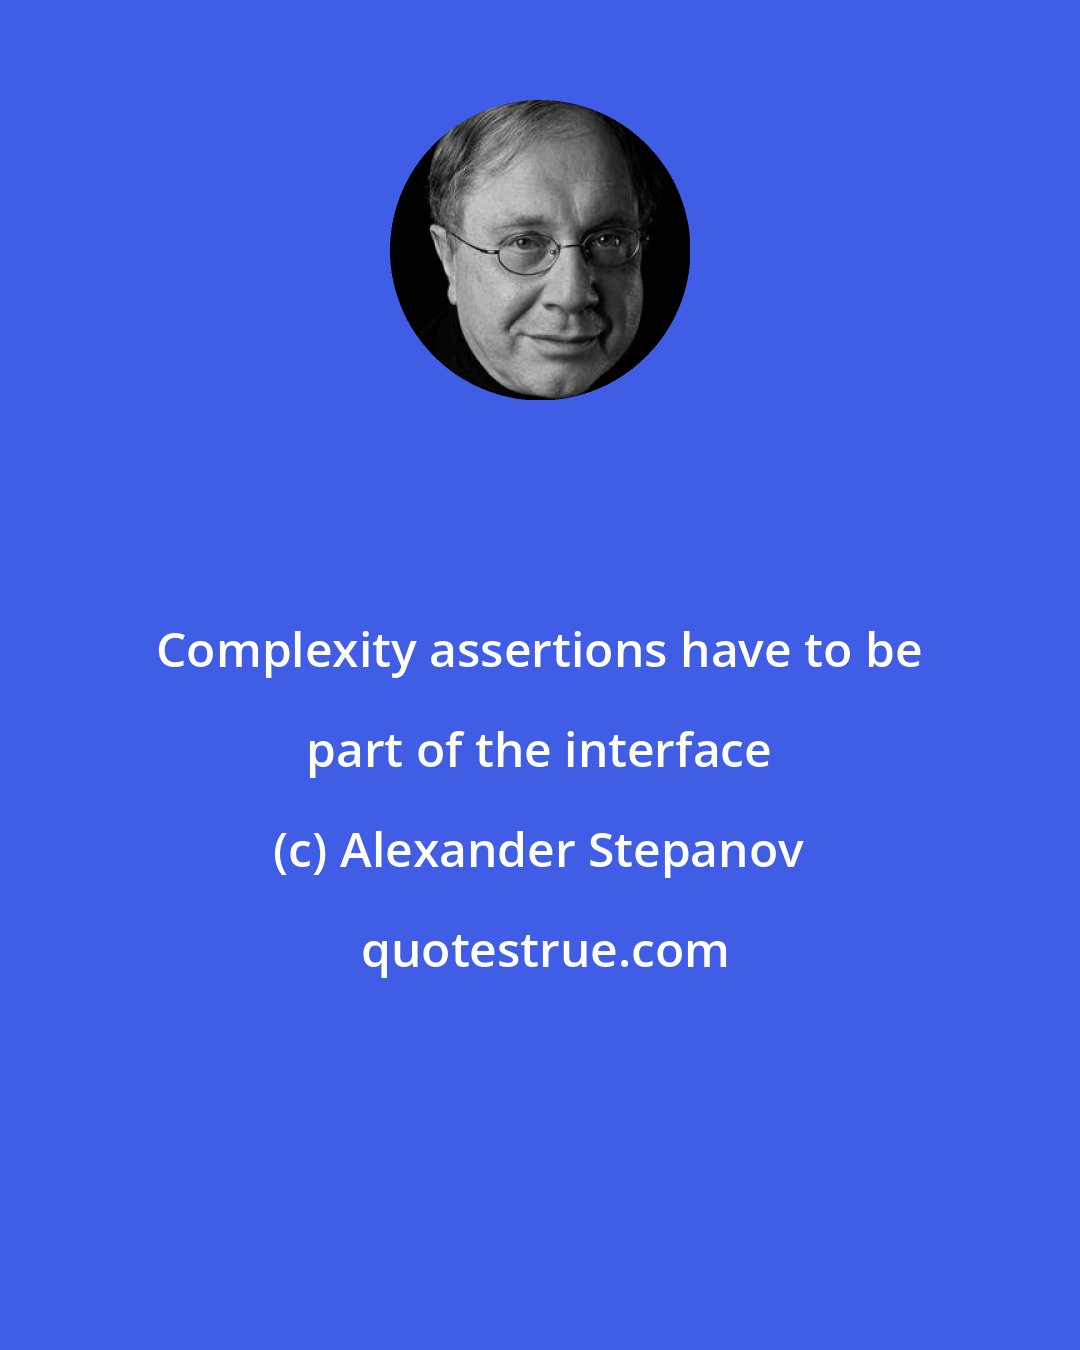 Alexander Stepanov: Complexity assertions have to be part of the interface